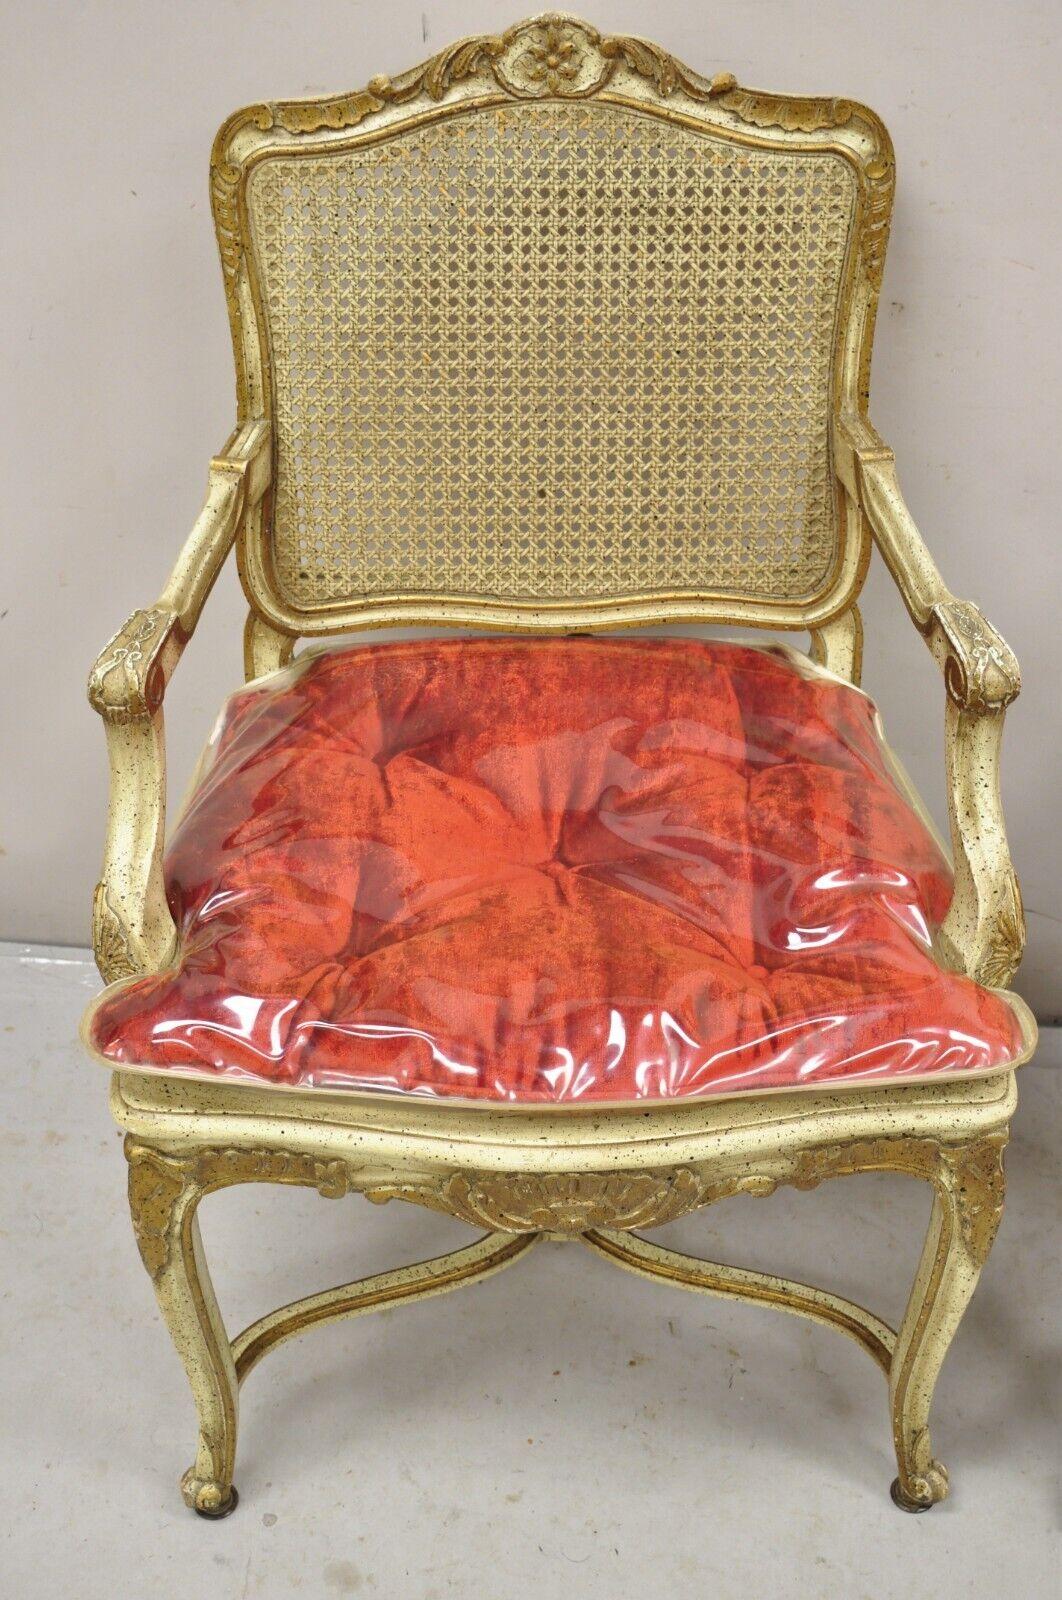 French Louis XV Style Cream Painted Carved Wood Cane Fauteuil Arm Chairs - Pair For Sale 7